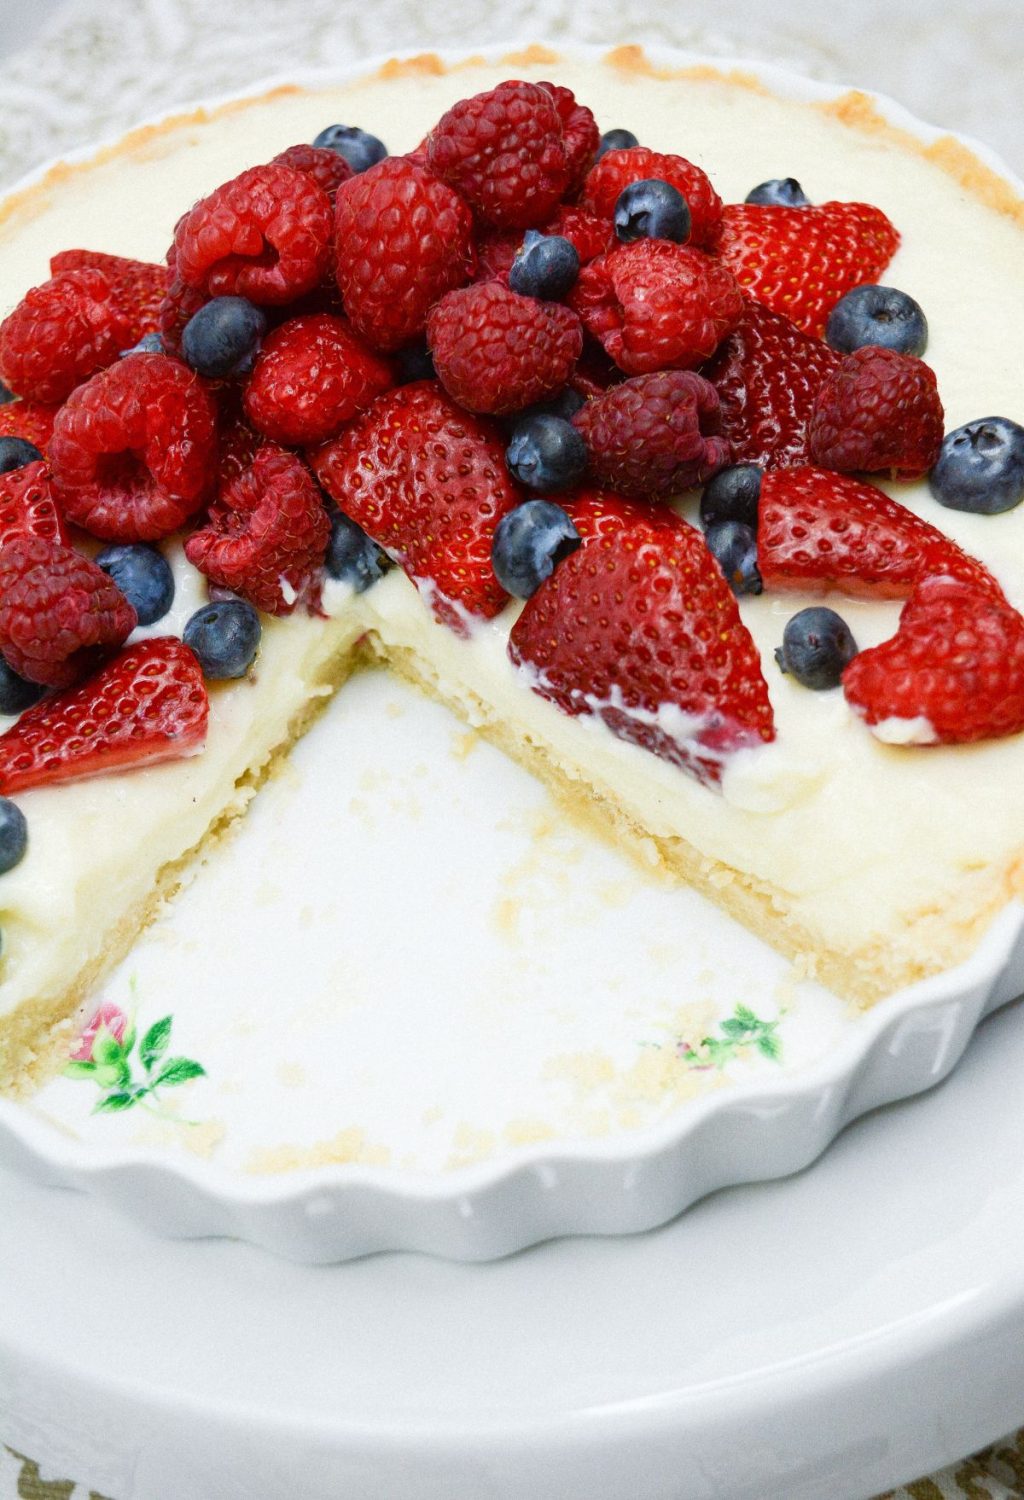 A pie with berries and cream on a white plate.